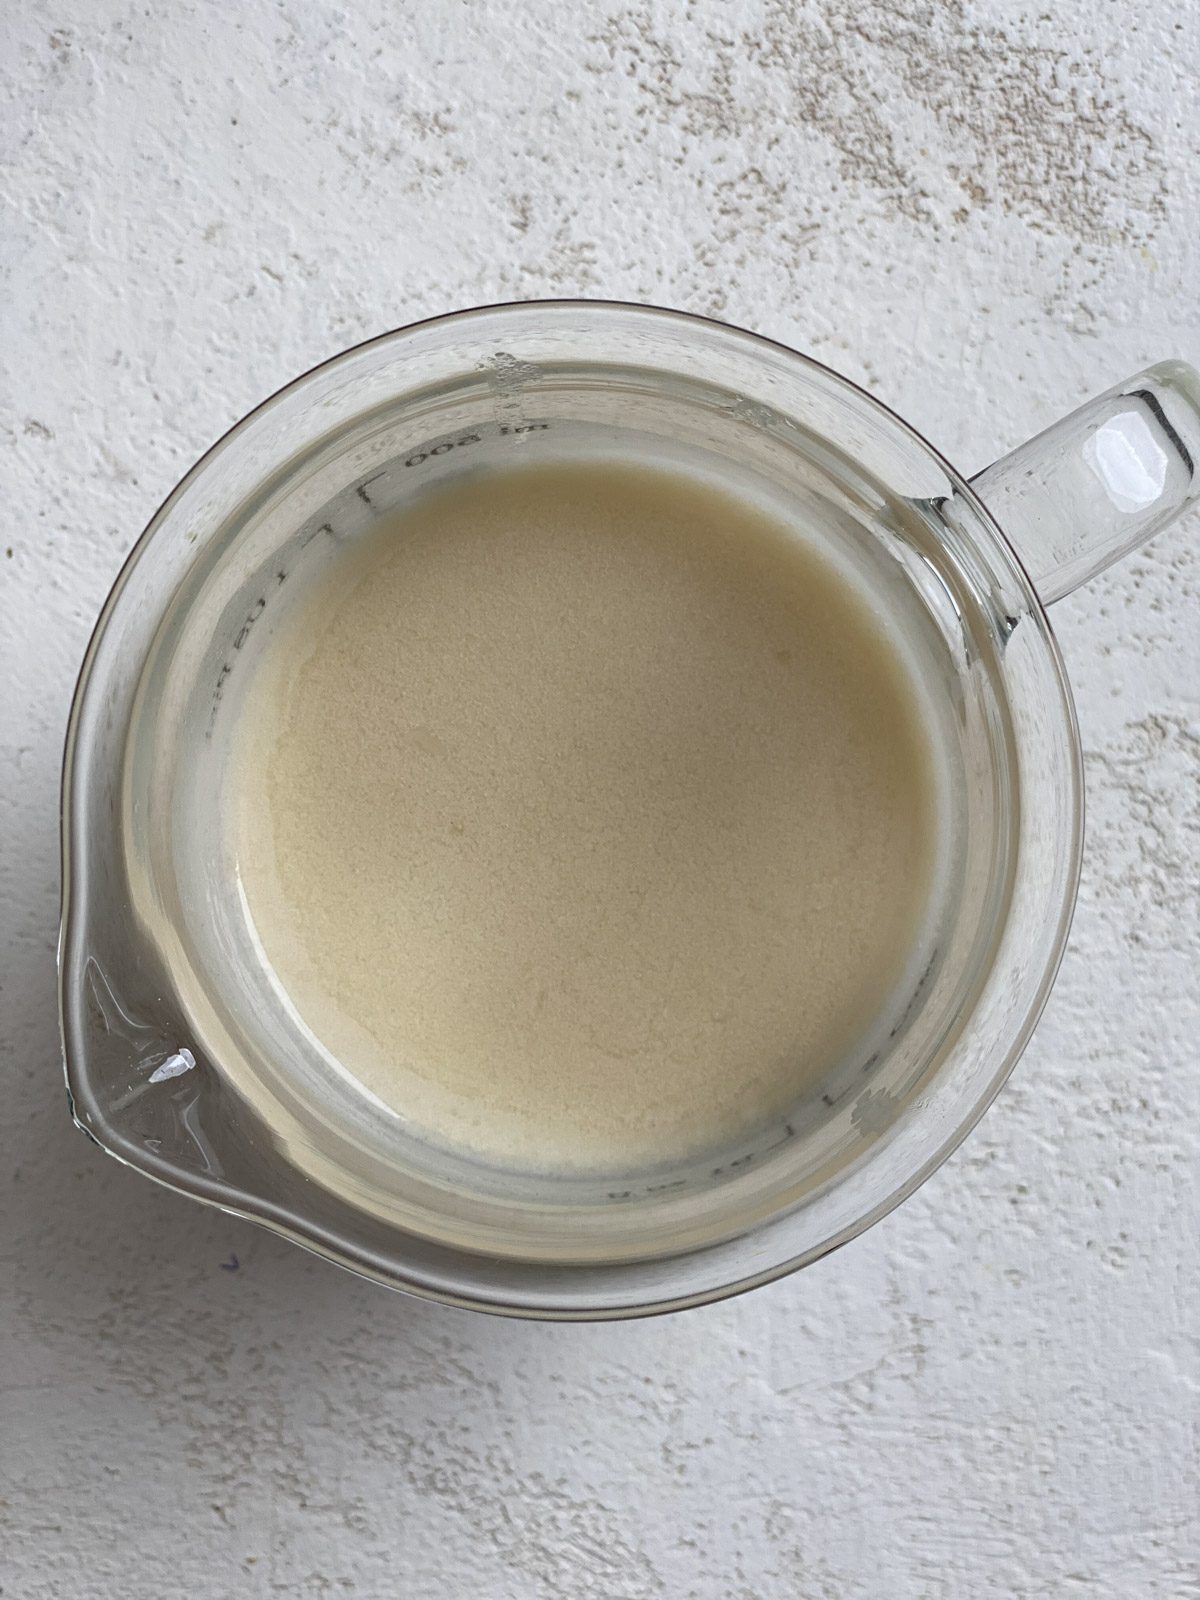 post microwaved plant butter and milk in a glass cup against a white surface